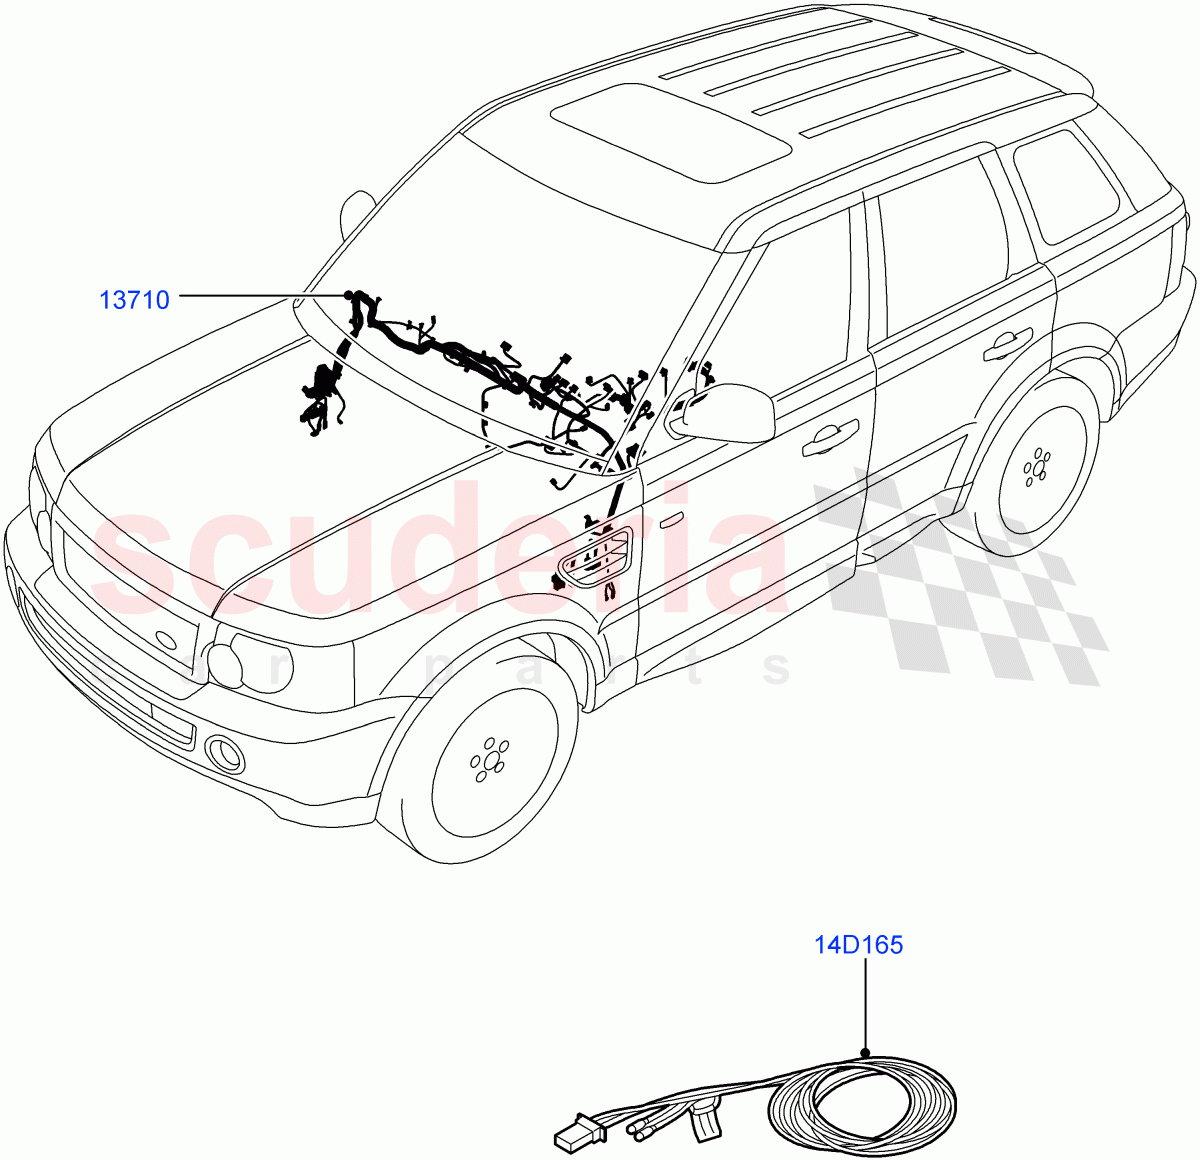 Electrical Wiring - Engine And Dash(Facia)((V)FROMAA000001) of Land Rover Land Rover Range Rover Sport (2010-2013) [5.0 OHC SGDI NA V8 Petrol]